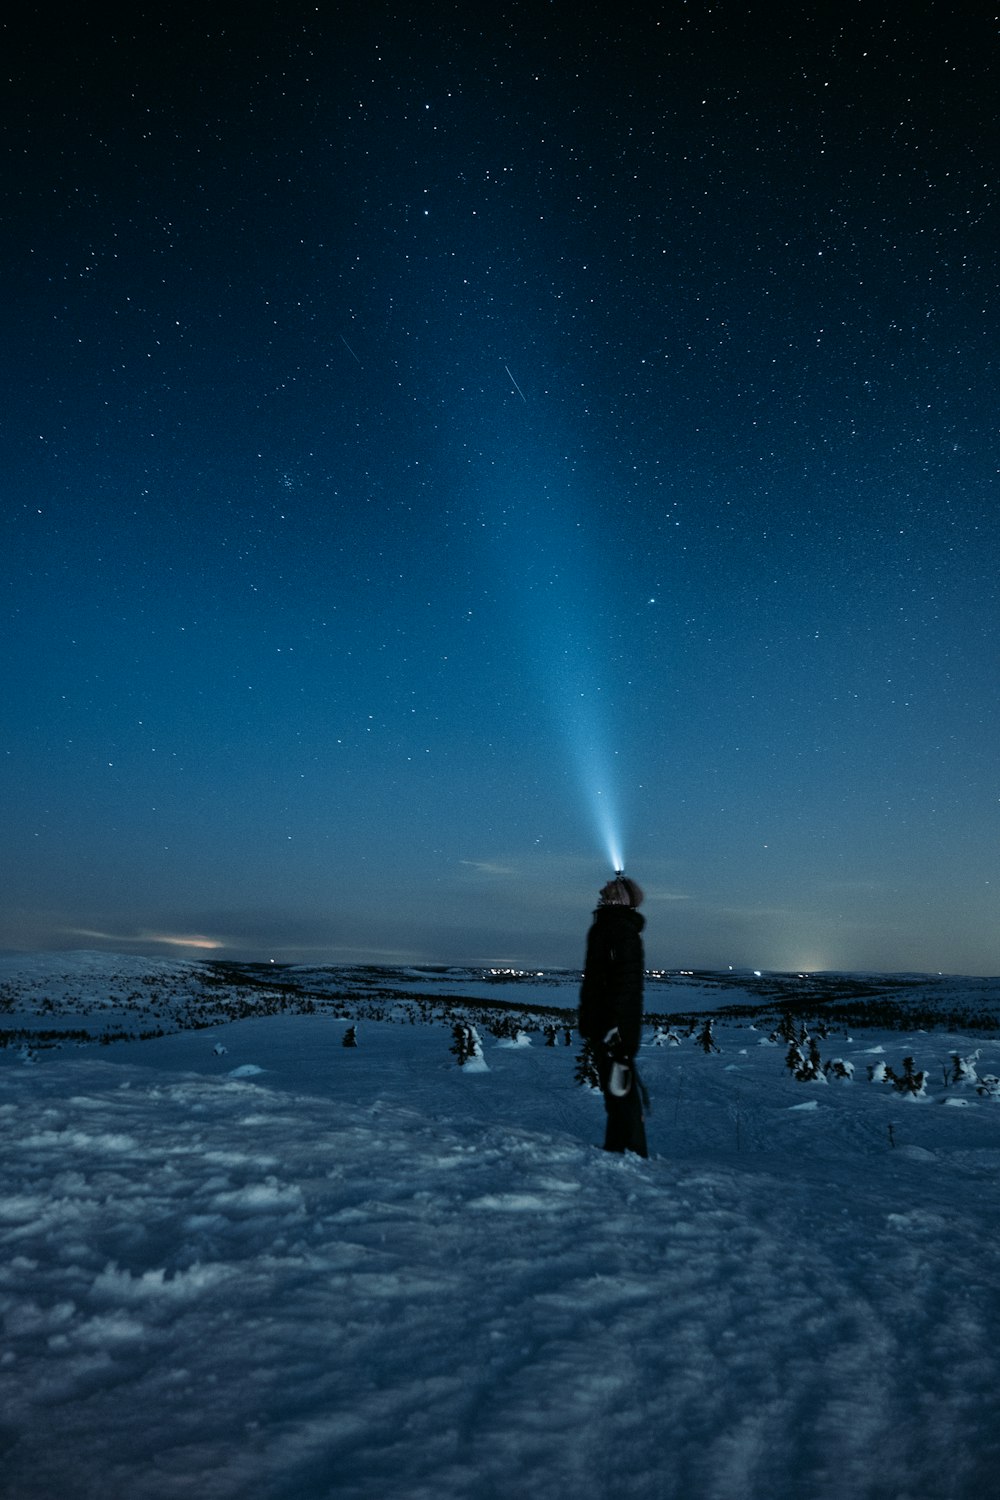 man standing on snow covered ground under starry night